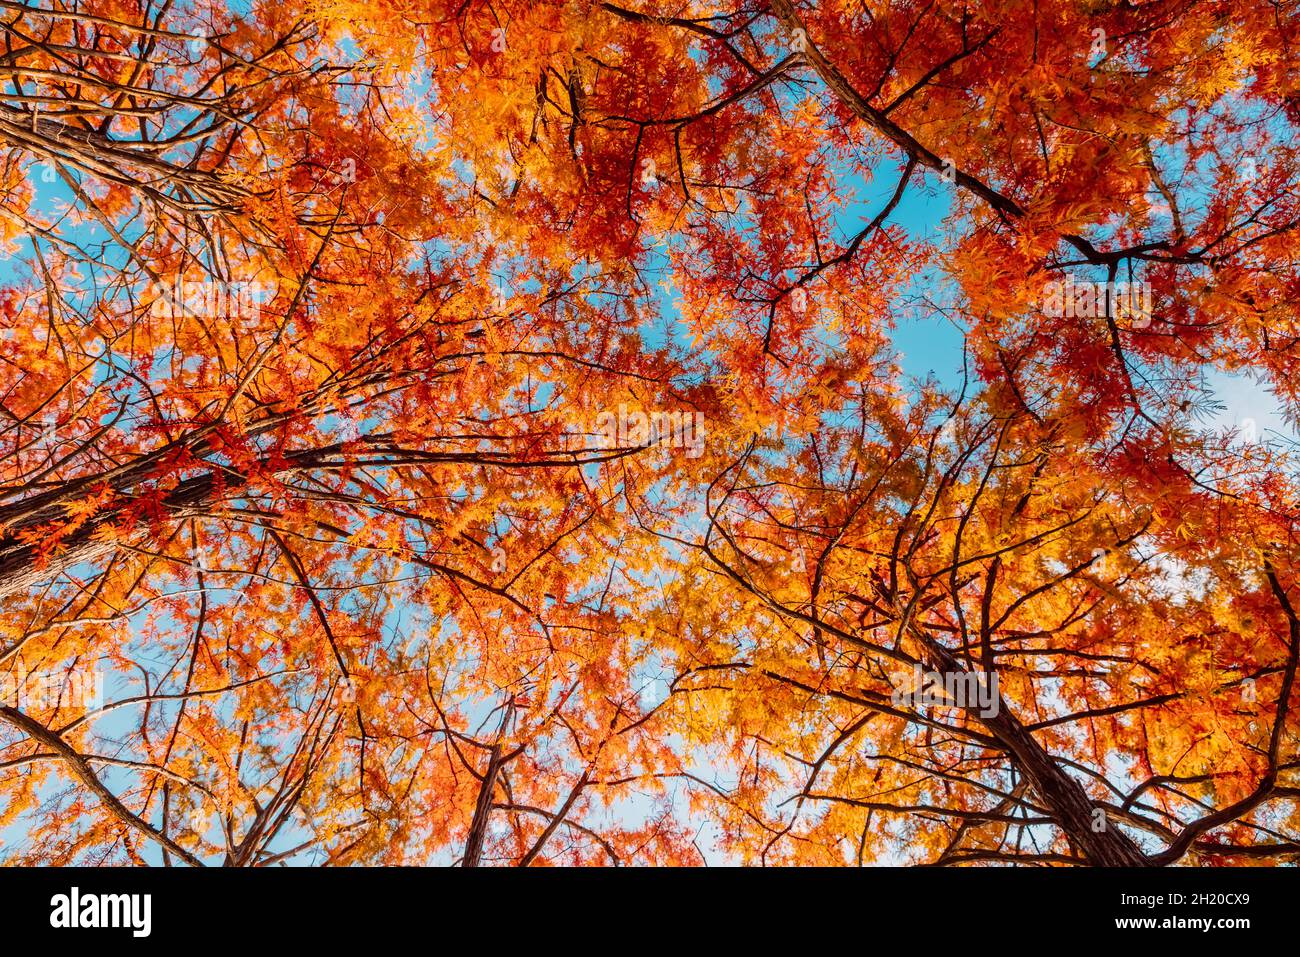 Taxodium distichum with red needles. Autumnal swamp cypresses and blue sky Stock Photo